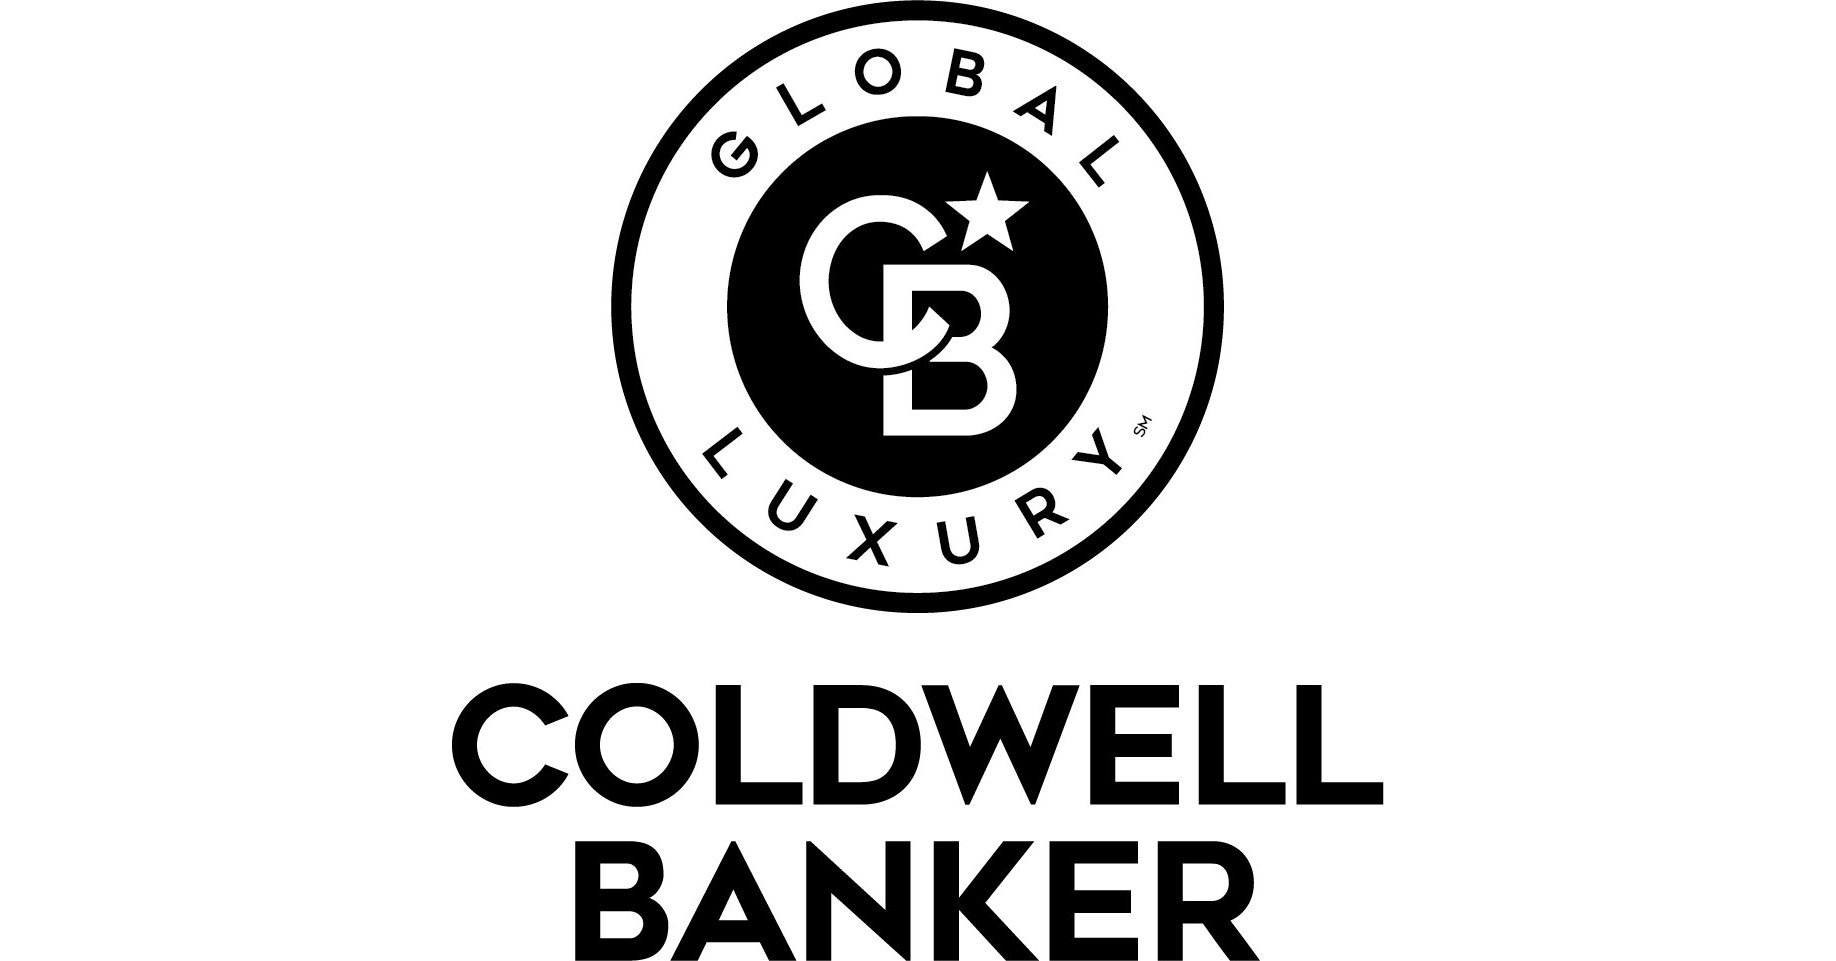 Elite Agents from Around the World Gather at Coldwell Banker Exclusive Three-Day Global Luxury Summit